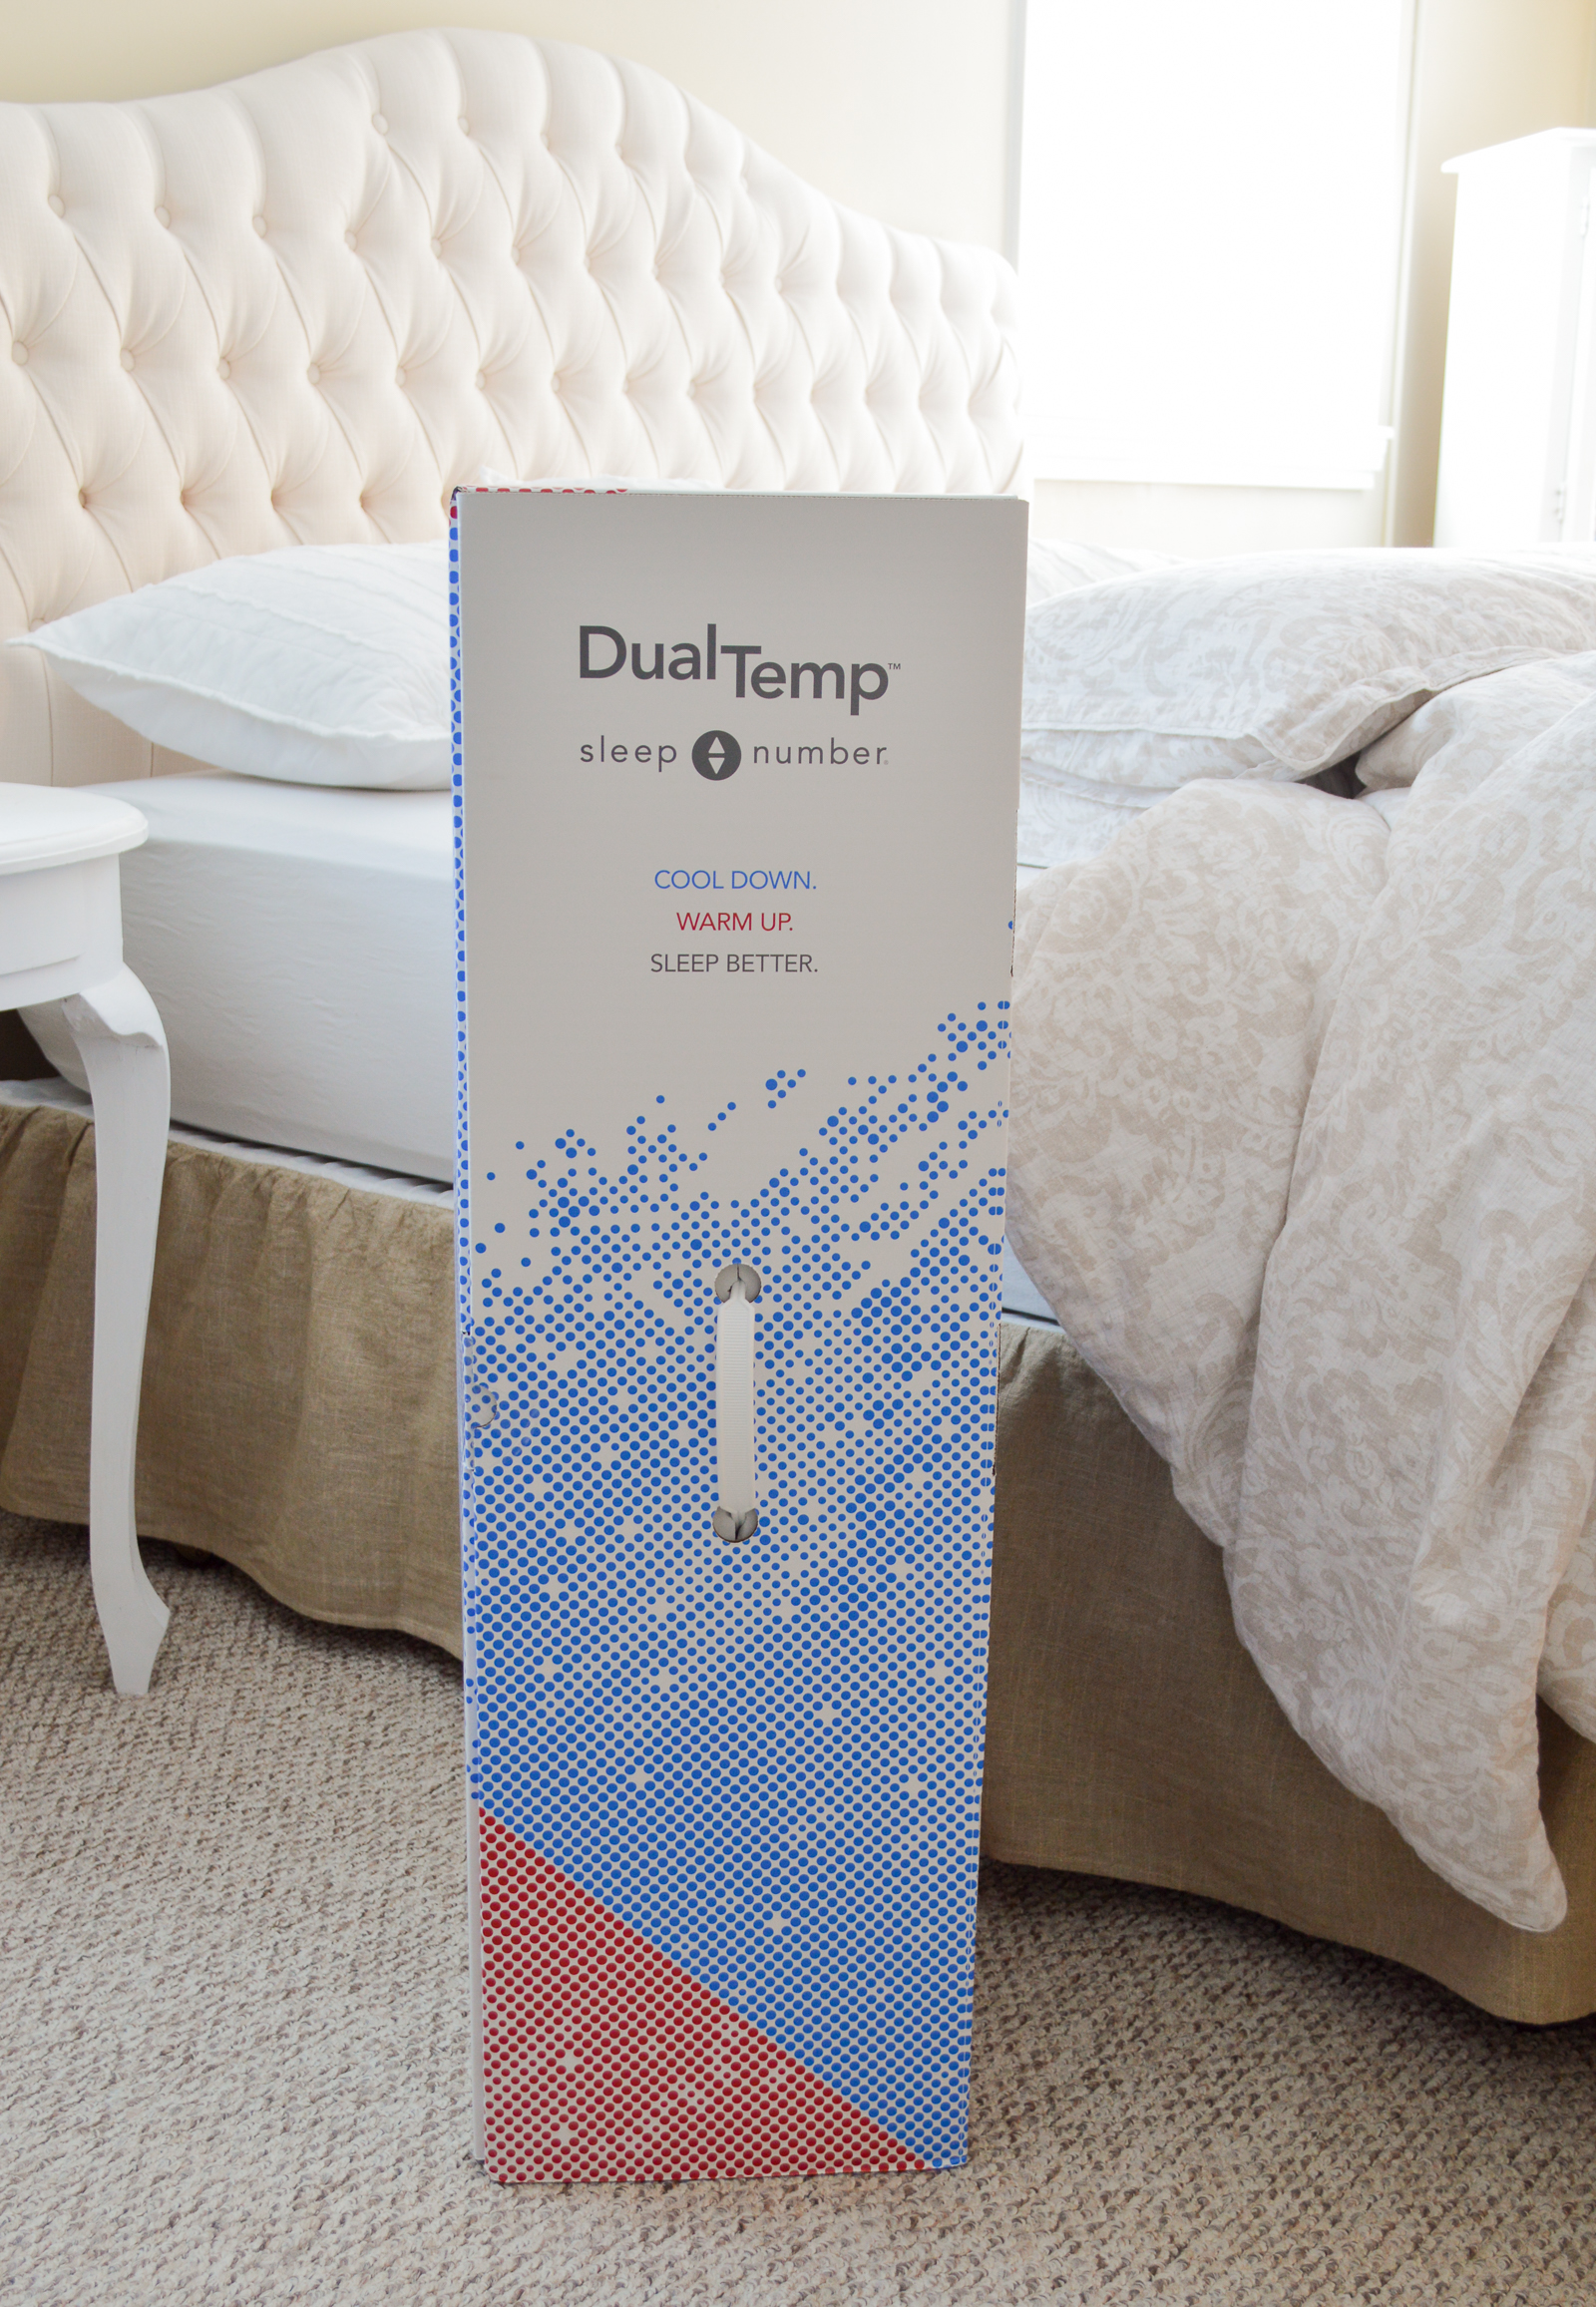 I'm having sweet dreams again, instead of sweat dreams! Restful Sleep During Menopause Without Hot Flashes with the Sleep Number Dual Layer. #ad 